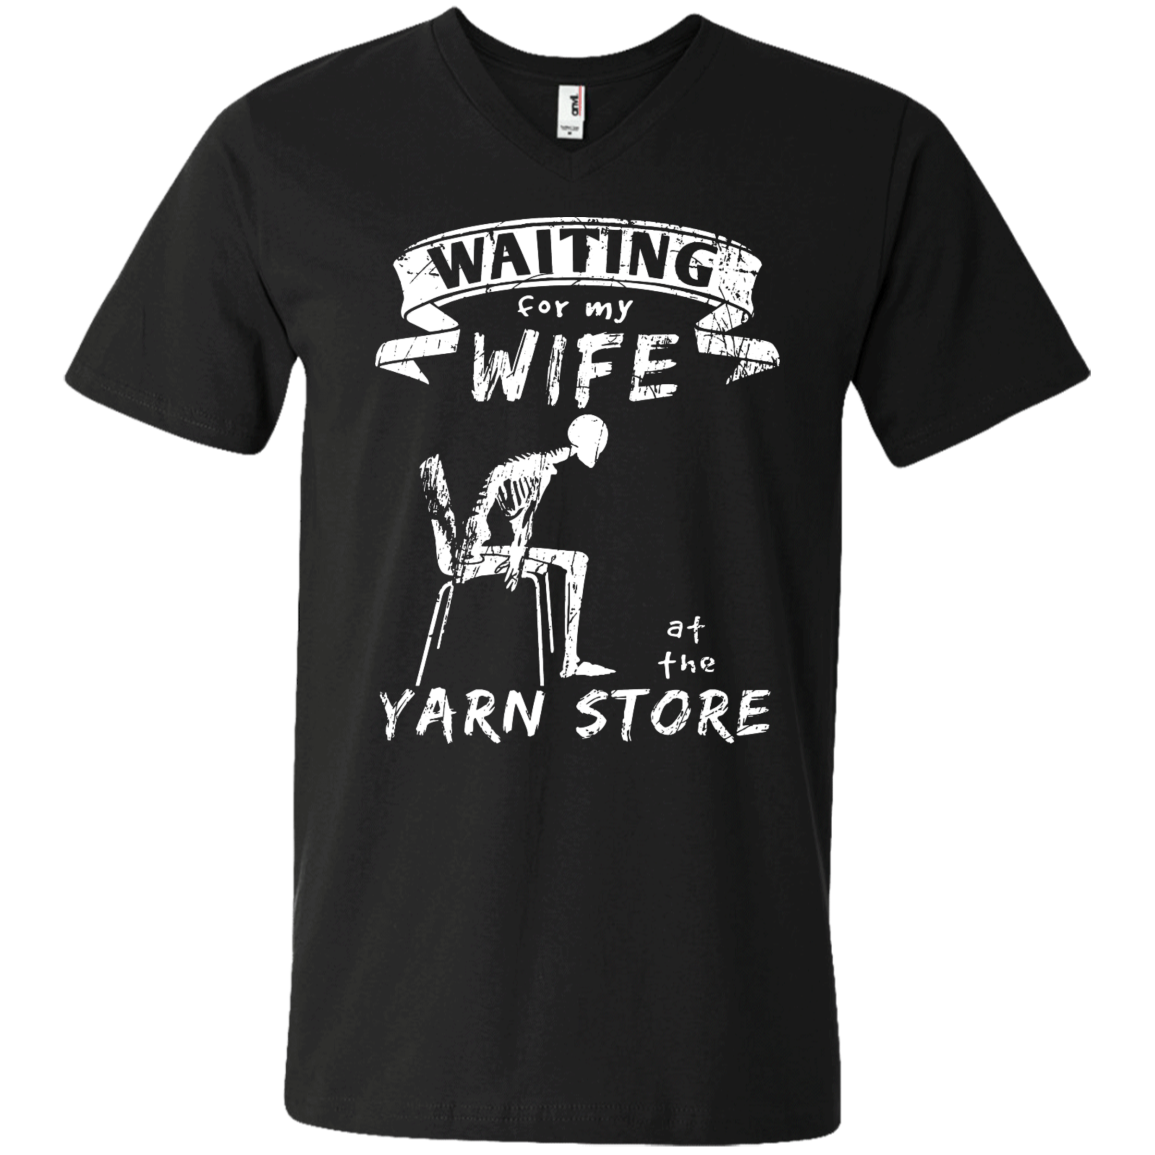 Waiting at the Yarn Store Men's and Unisex T-Shirts - Crafter4Life - 5